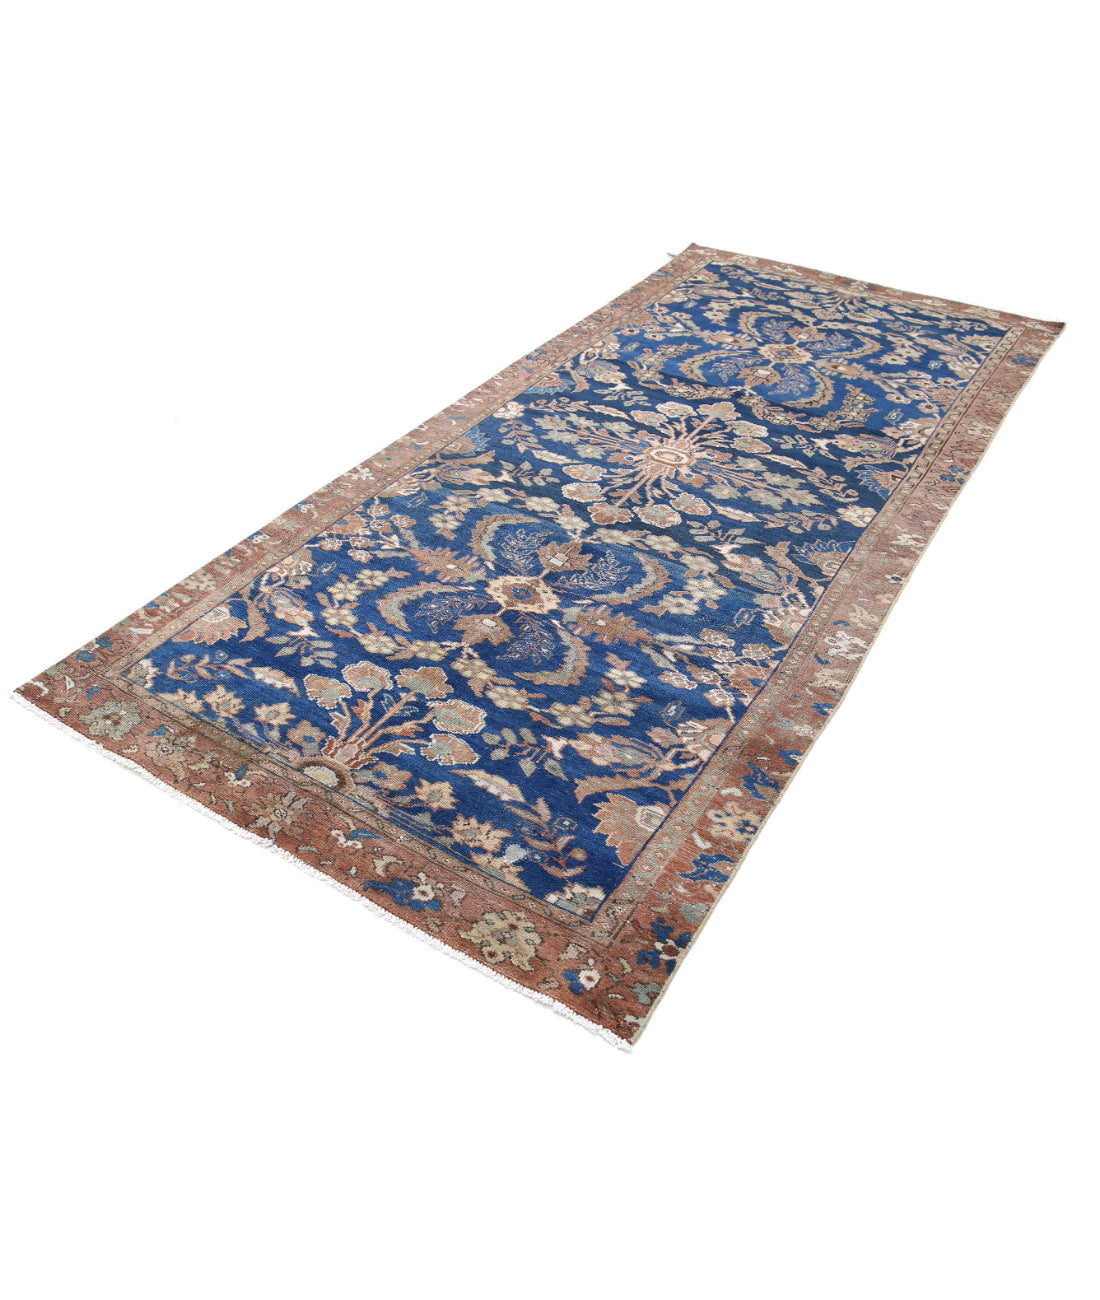 Hand Knotted Vintage Persian Hamadan Wool Rug - 4'6'' x 10'1'' 4'6'' x 10'1'' (135 X 303) / Blue / Brown